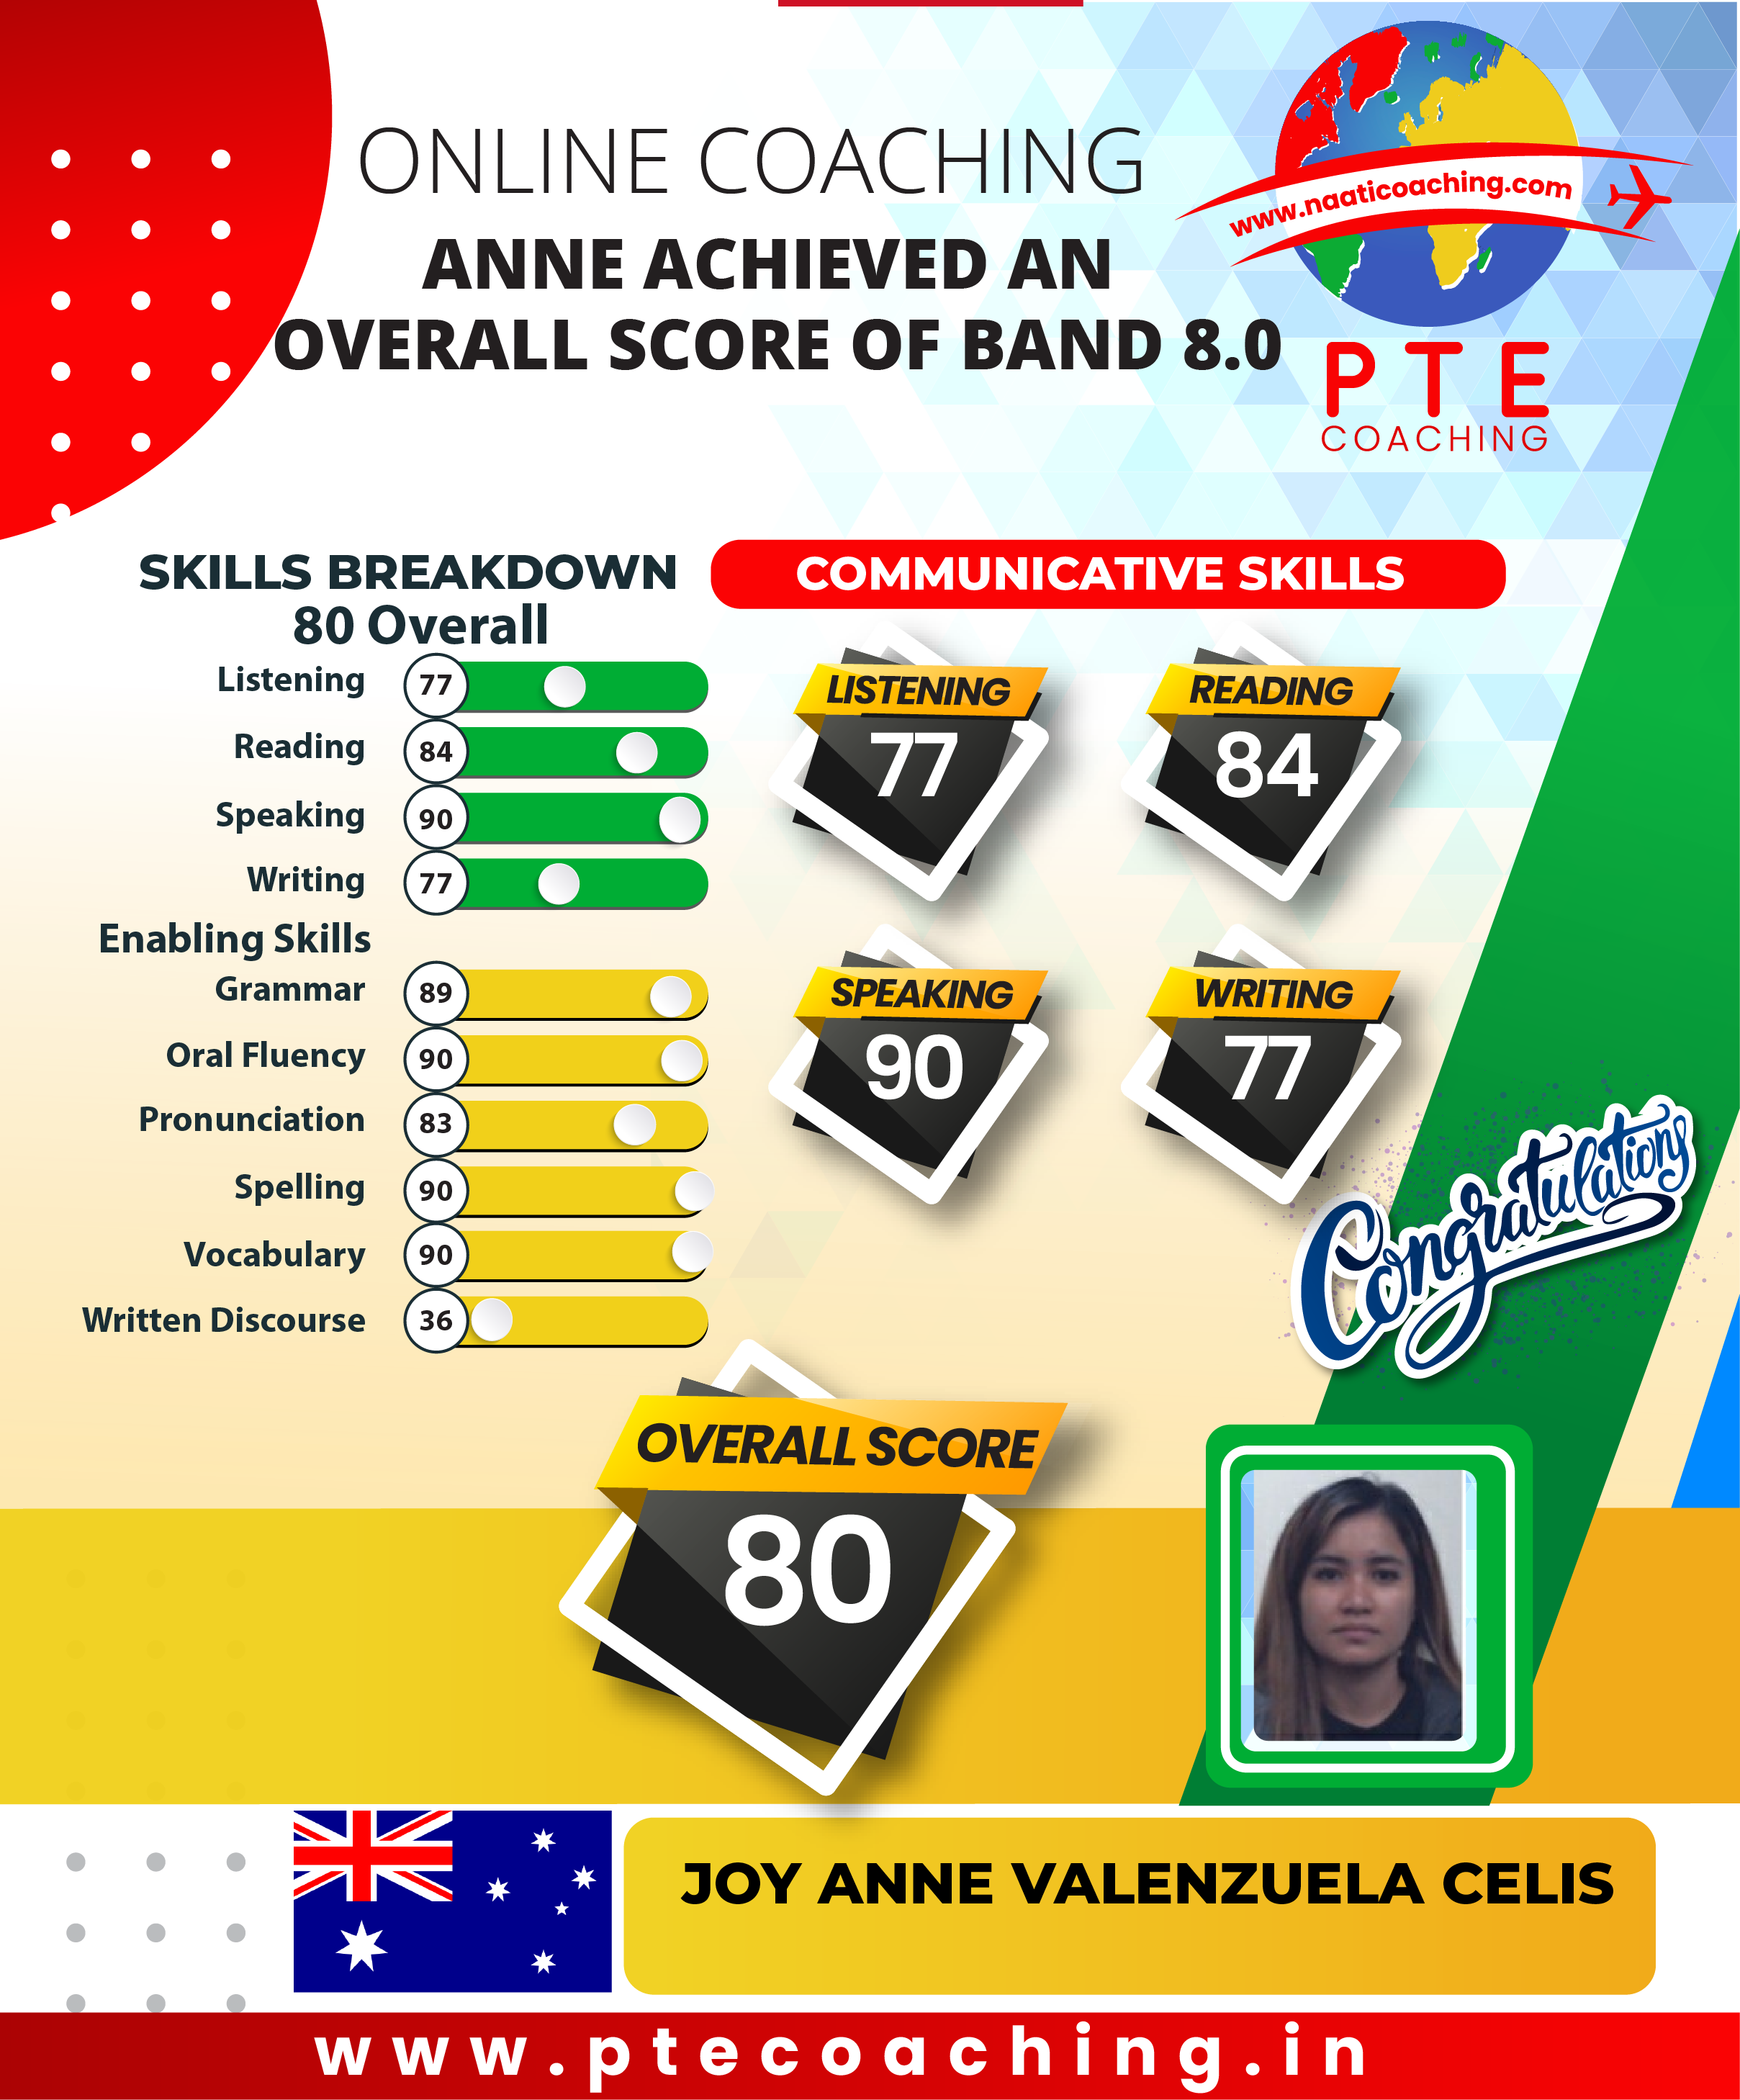 PTE Coaching Scorecard - Anne achieved an overall score of band 8.0